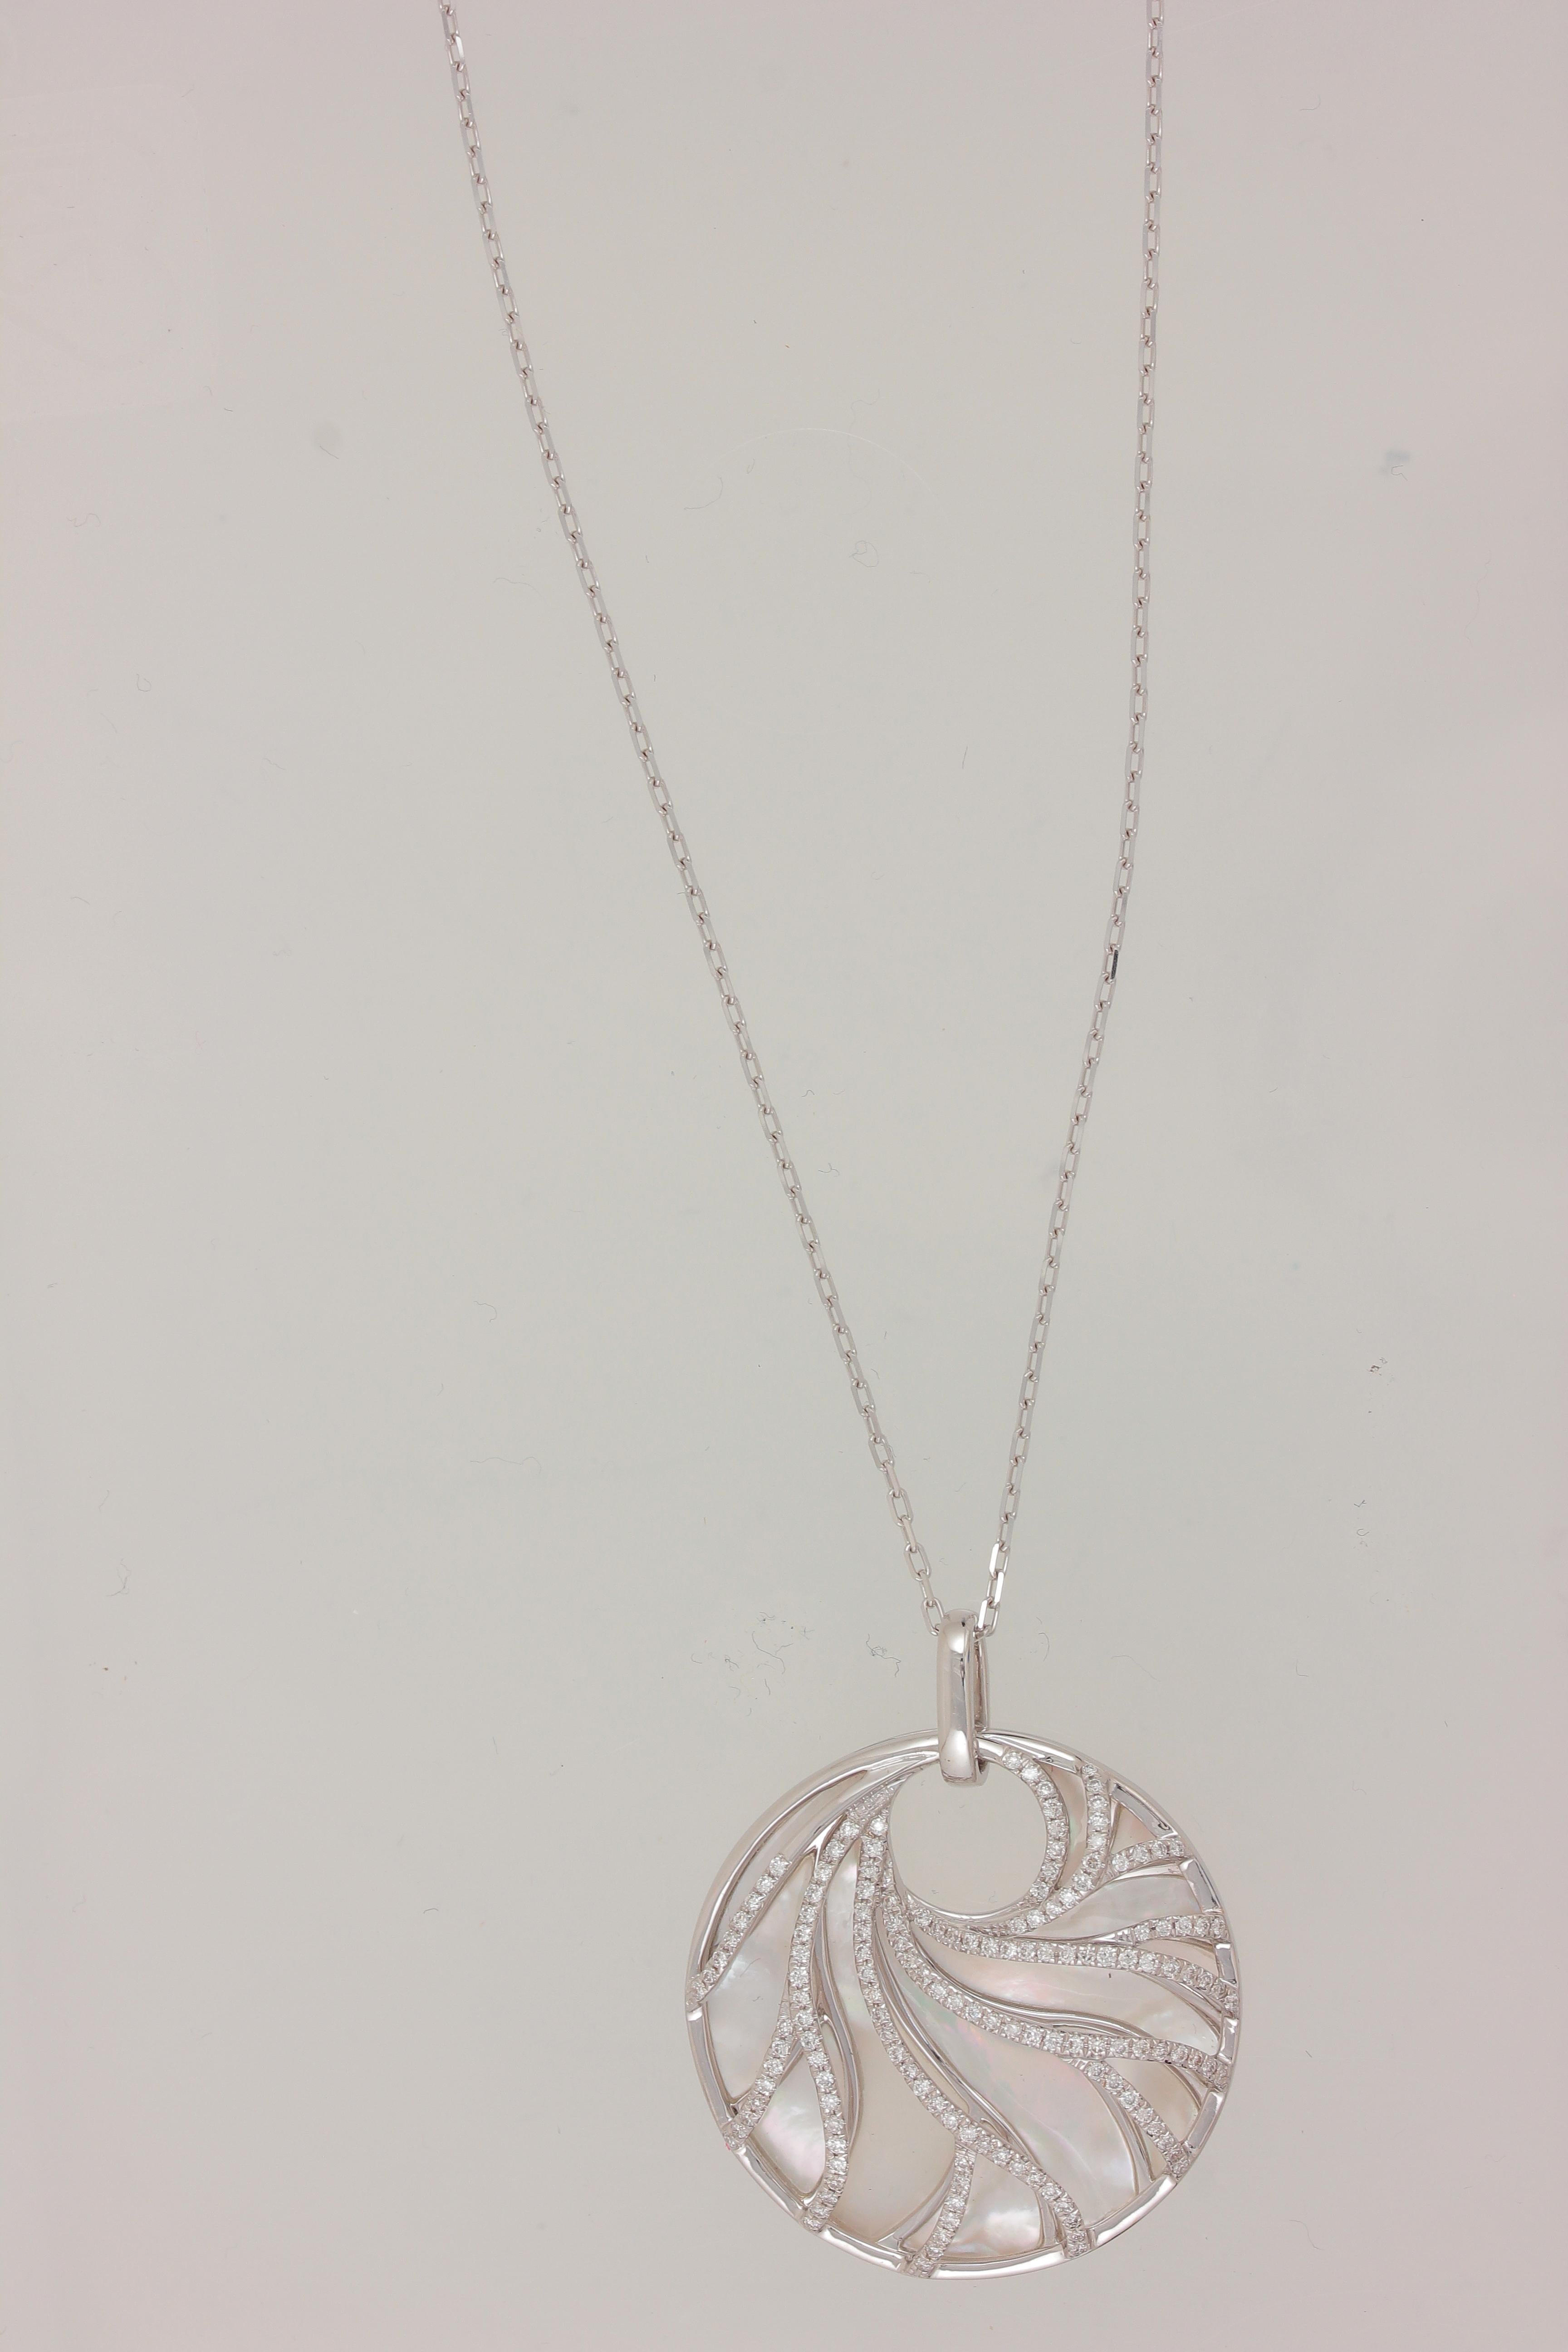 Contemporary Frederic Sage White Mother-of-Pearl Venus Diamond Pendant with Chain For Sale